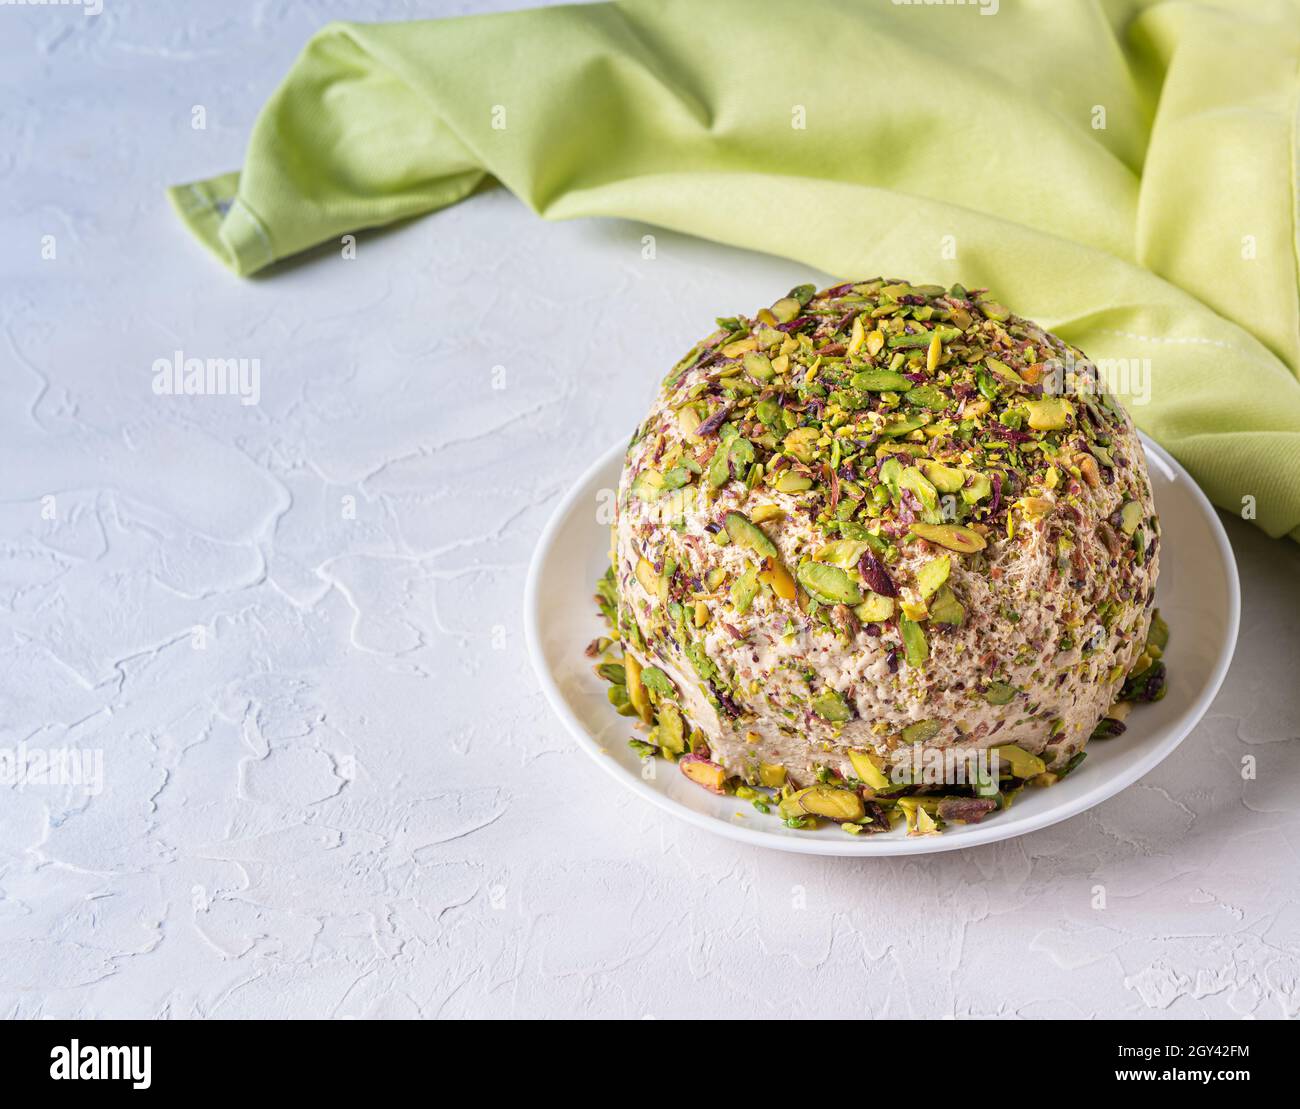 Sesame halva with pistachios nuts on white background with green linen napkin on side and copy space. Turkish delight. Traditional middle eastern swee Stock Photo